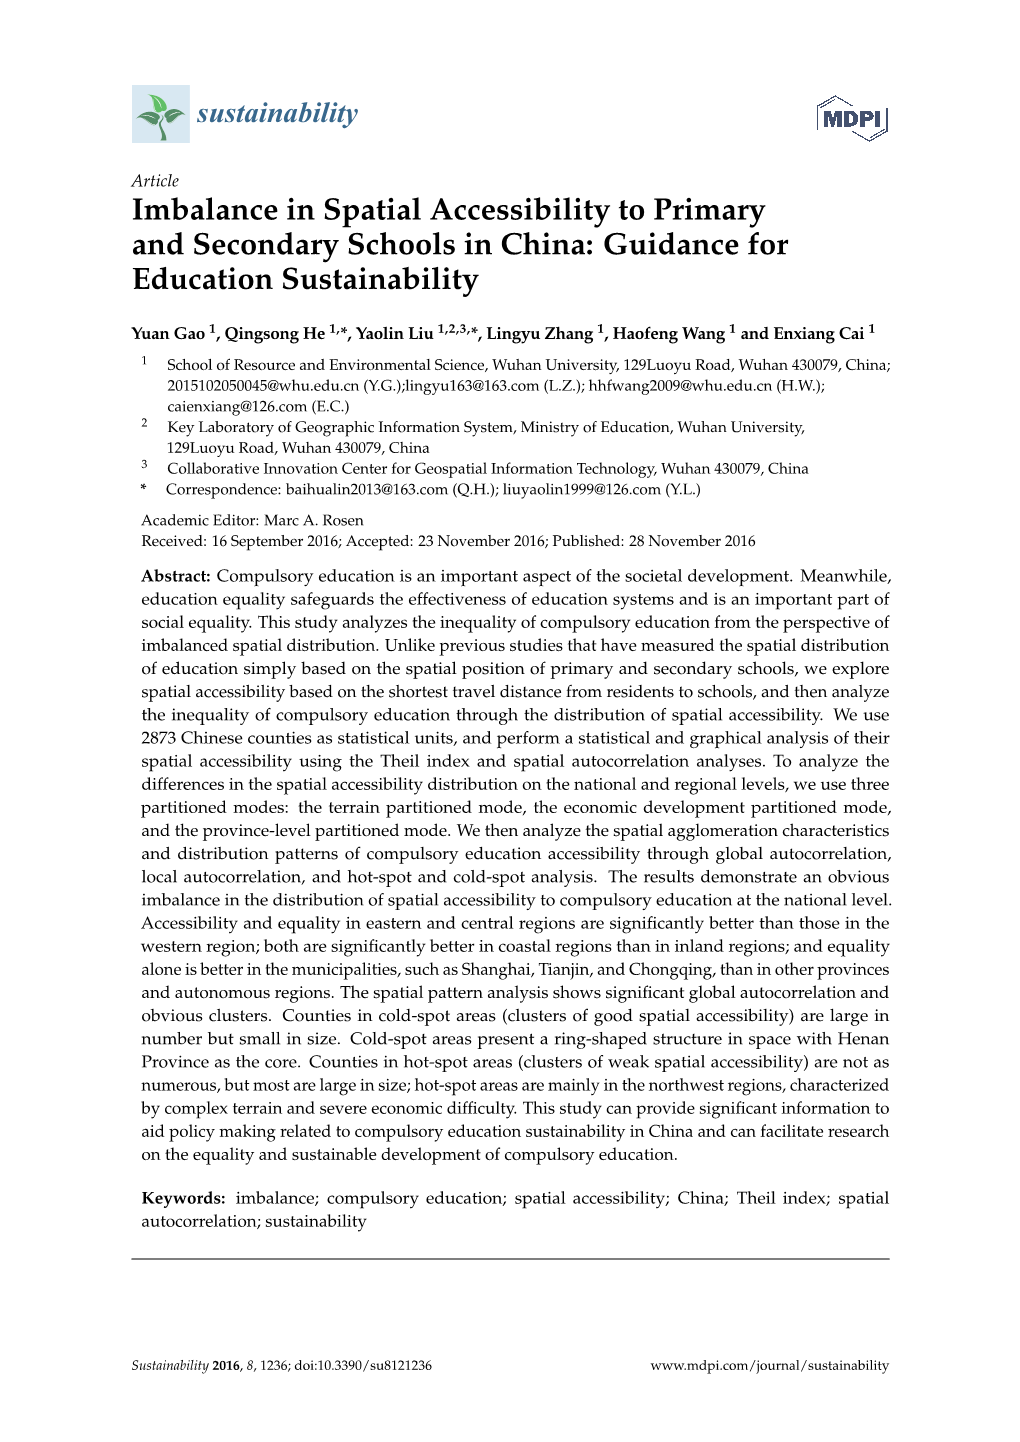 Imbalance in Spatial Accessibility to Primary and Secondary Schools in China: Guidance for Education Sustainability